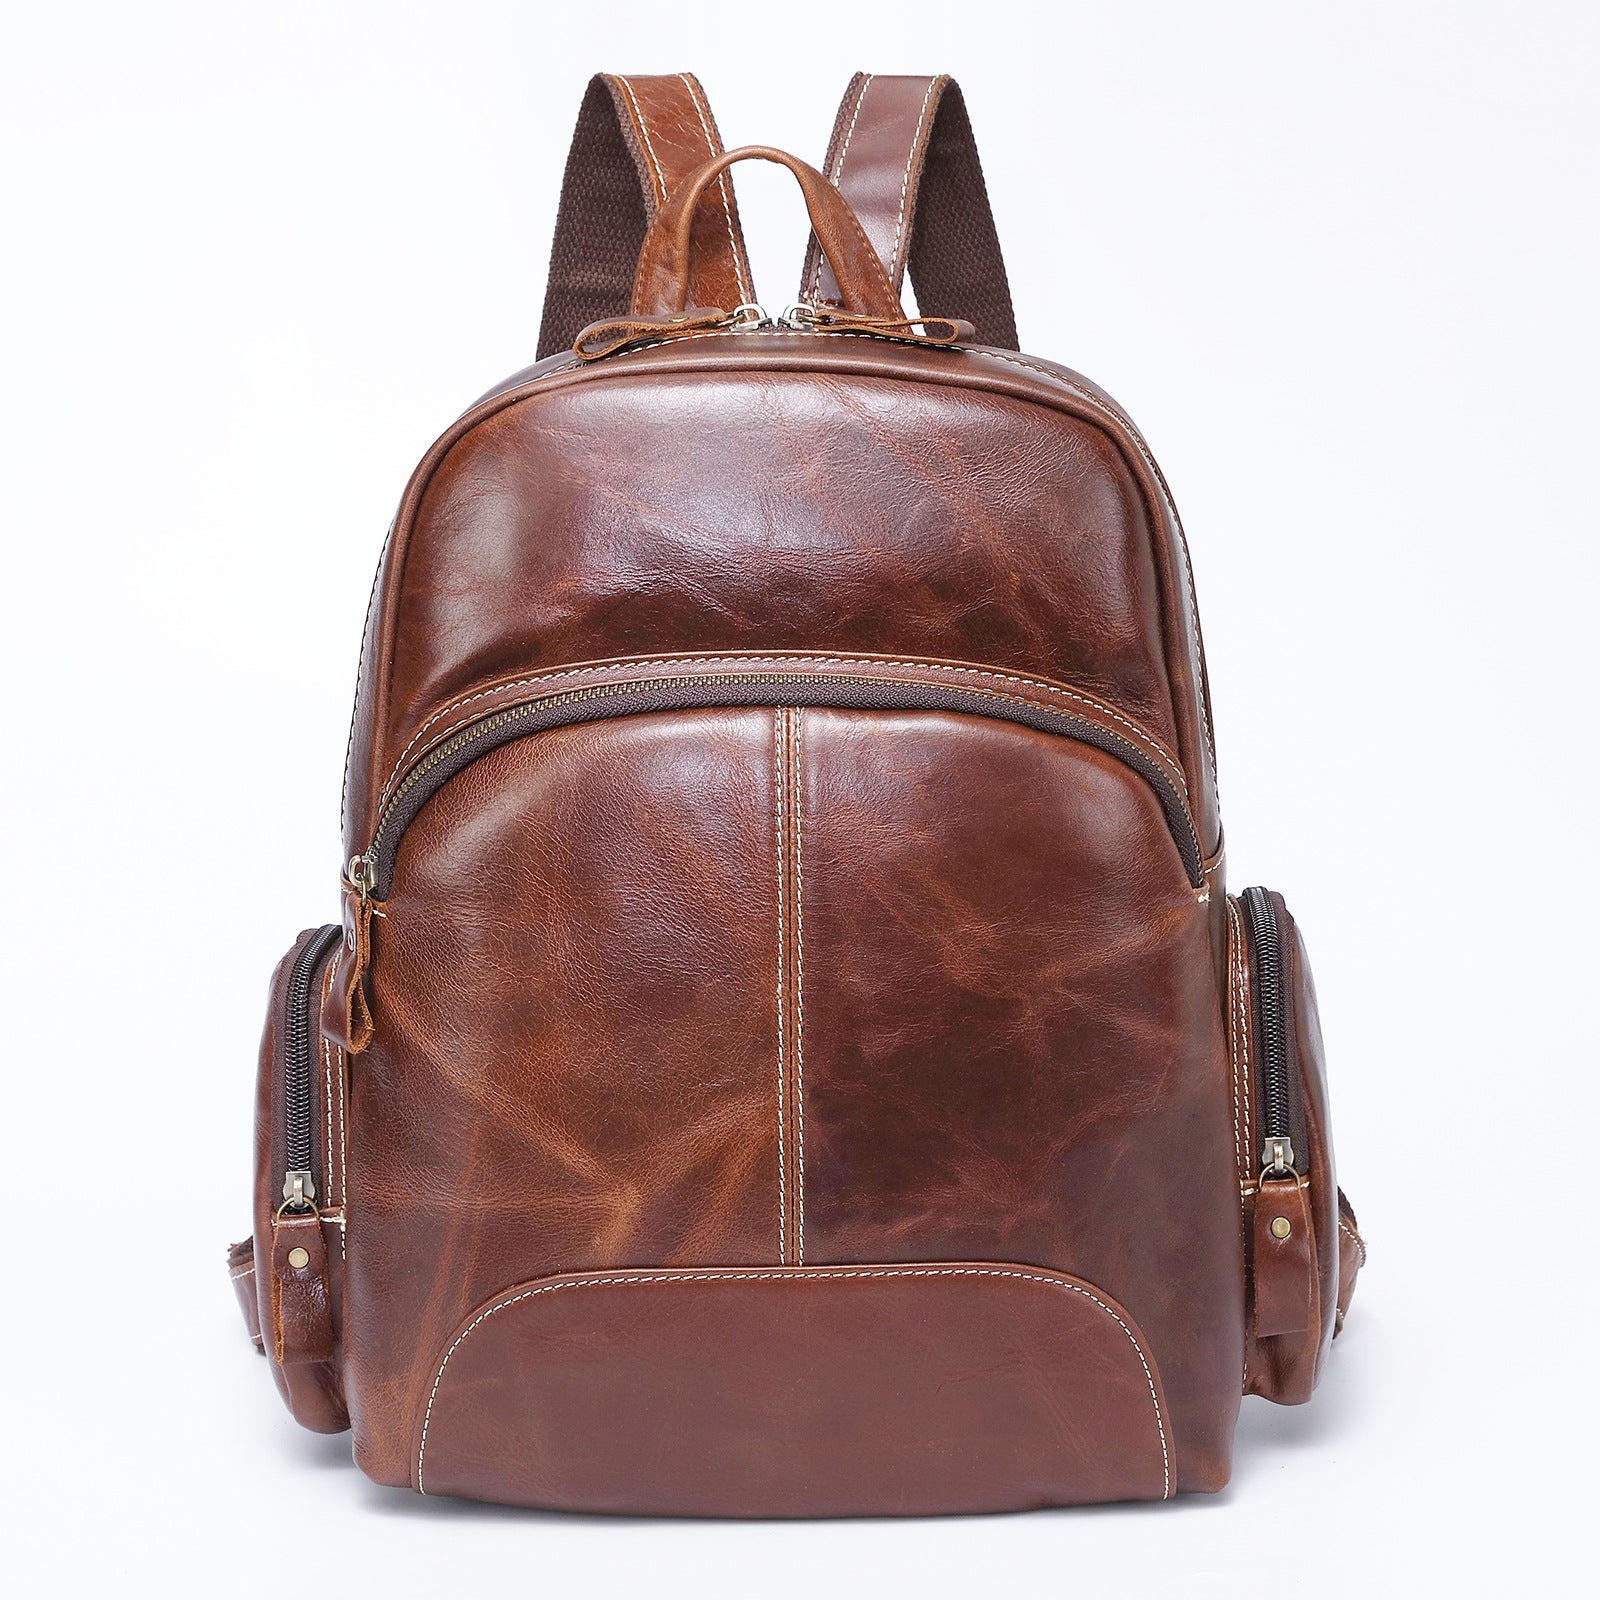 BROWN LEATHER MEN'S College Backpack Travel Backpack Leather Backpack ...